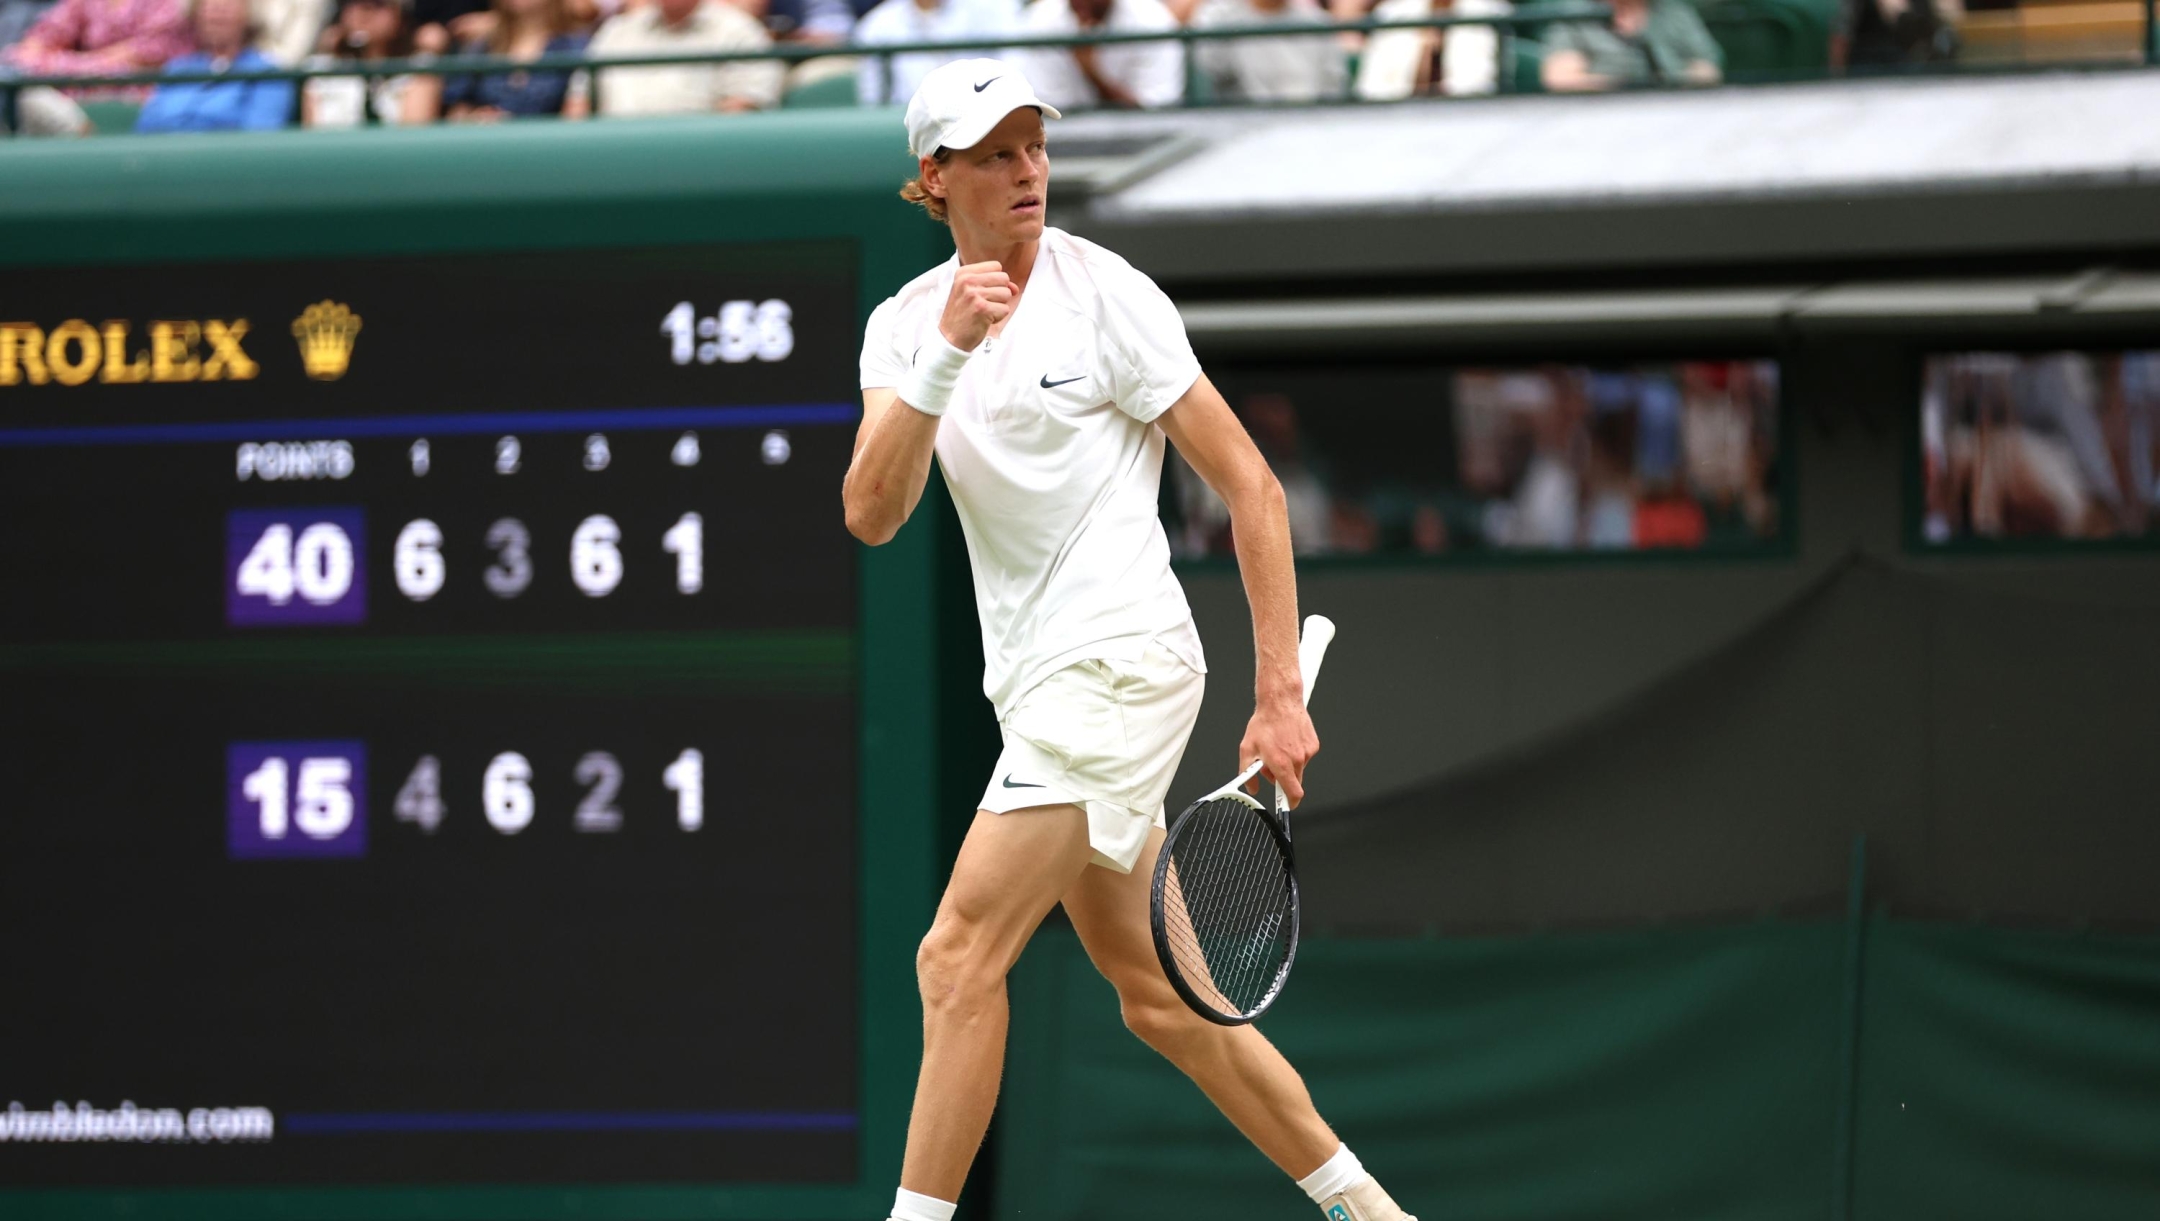 LONDON, ENGLAND - JULY 11: Jannik Sinner of Italy celebrates against Roman Safiullin in the Men's Singles Quarter Final match during day nine of The Championships Wimbledon 2023 at All England Lawn Tennis and Croquet Club on July 11, 2023 in London, England. (Photo by Clive Brunskill/Getty Images)